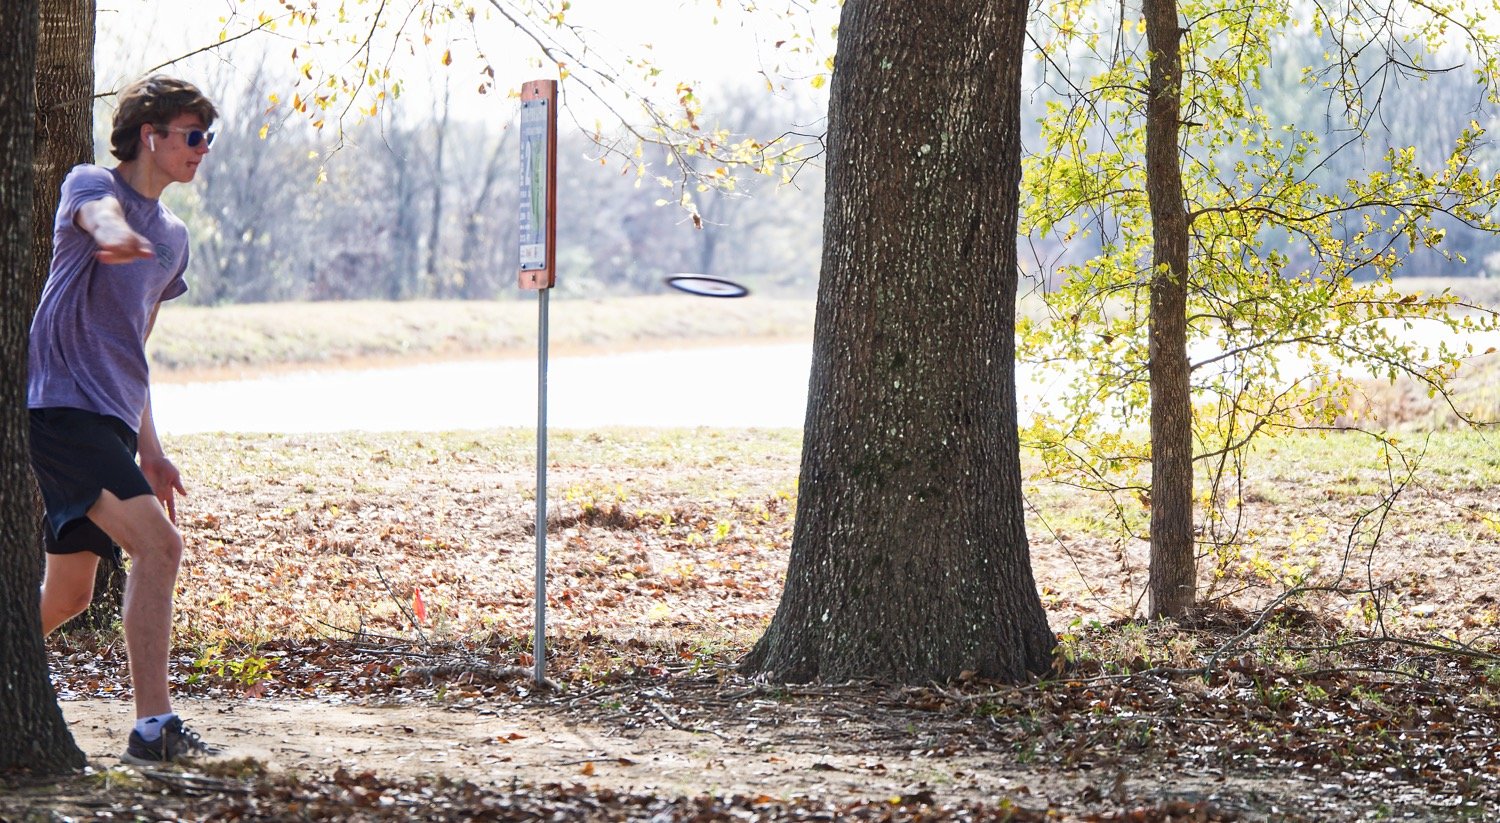 The tee on the second hole of The Preserve sits at the bottom a hill, overlooking a fishing pond, seen behind this thrower.
[see more shots or purchase prints]